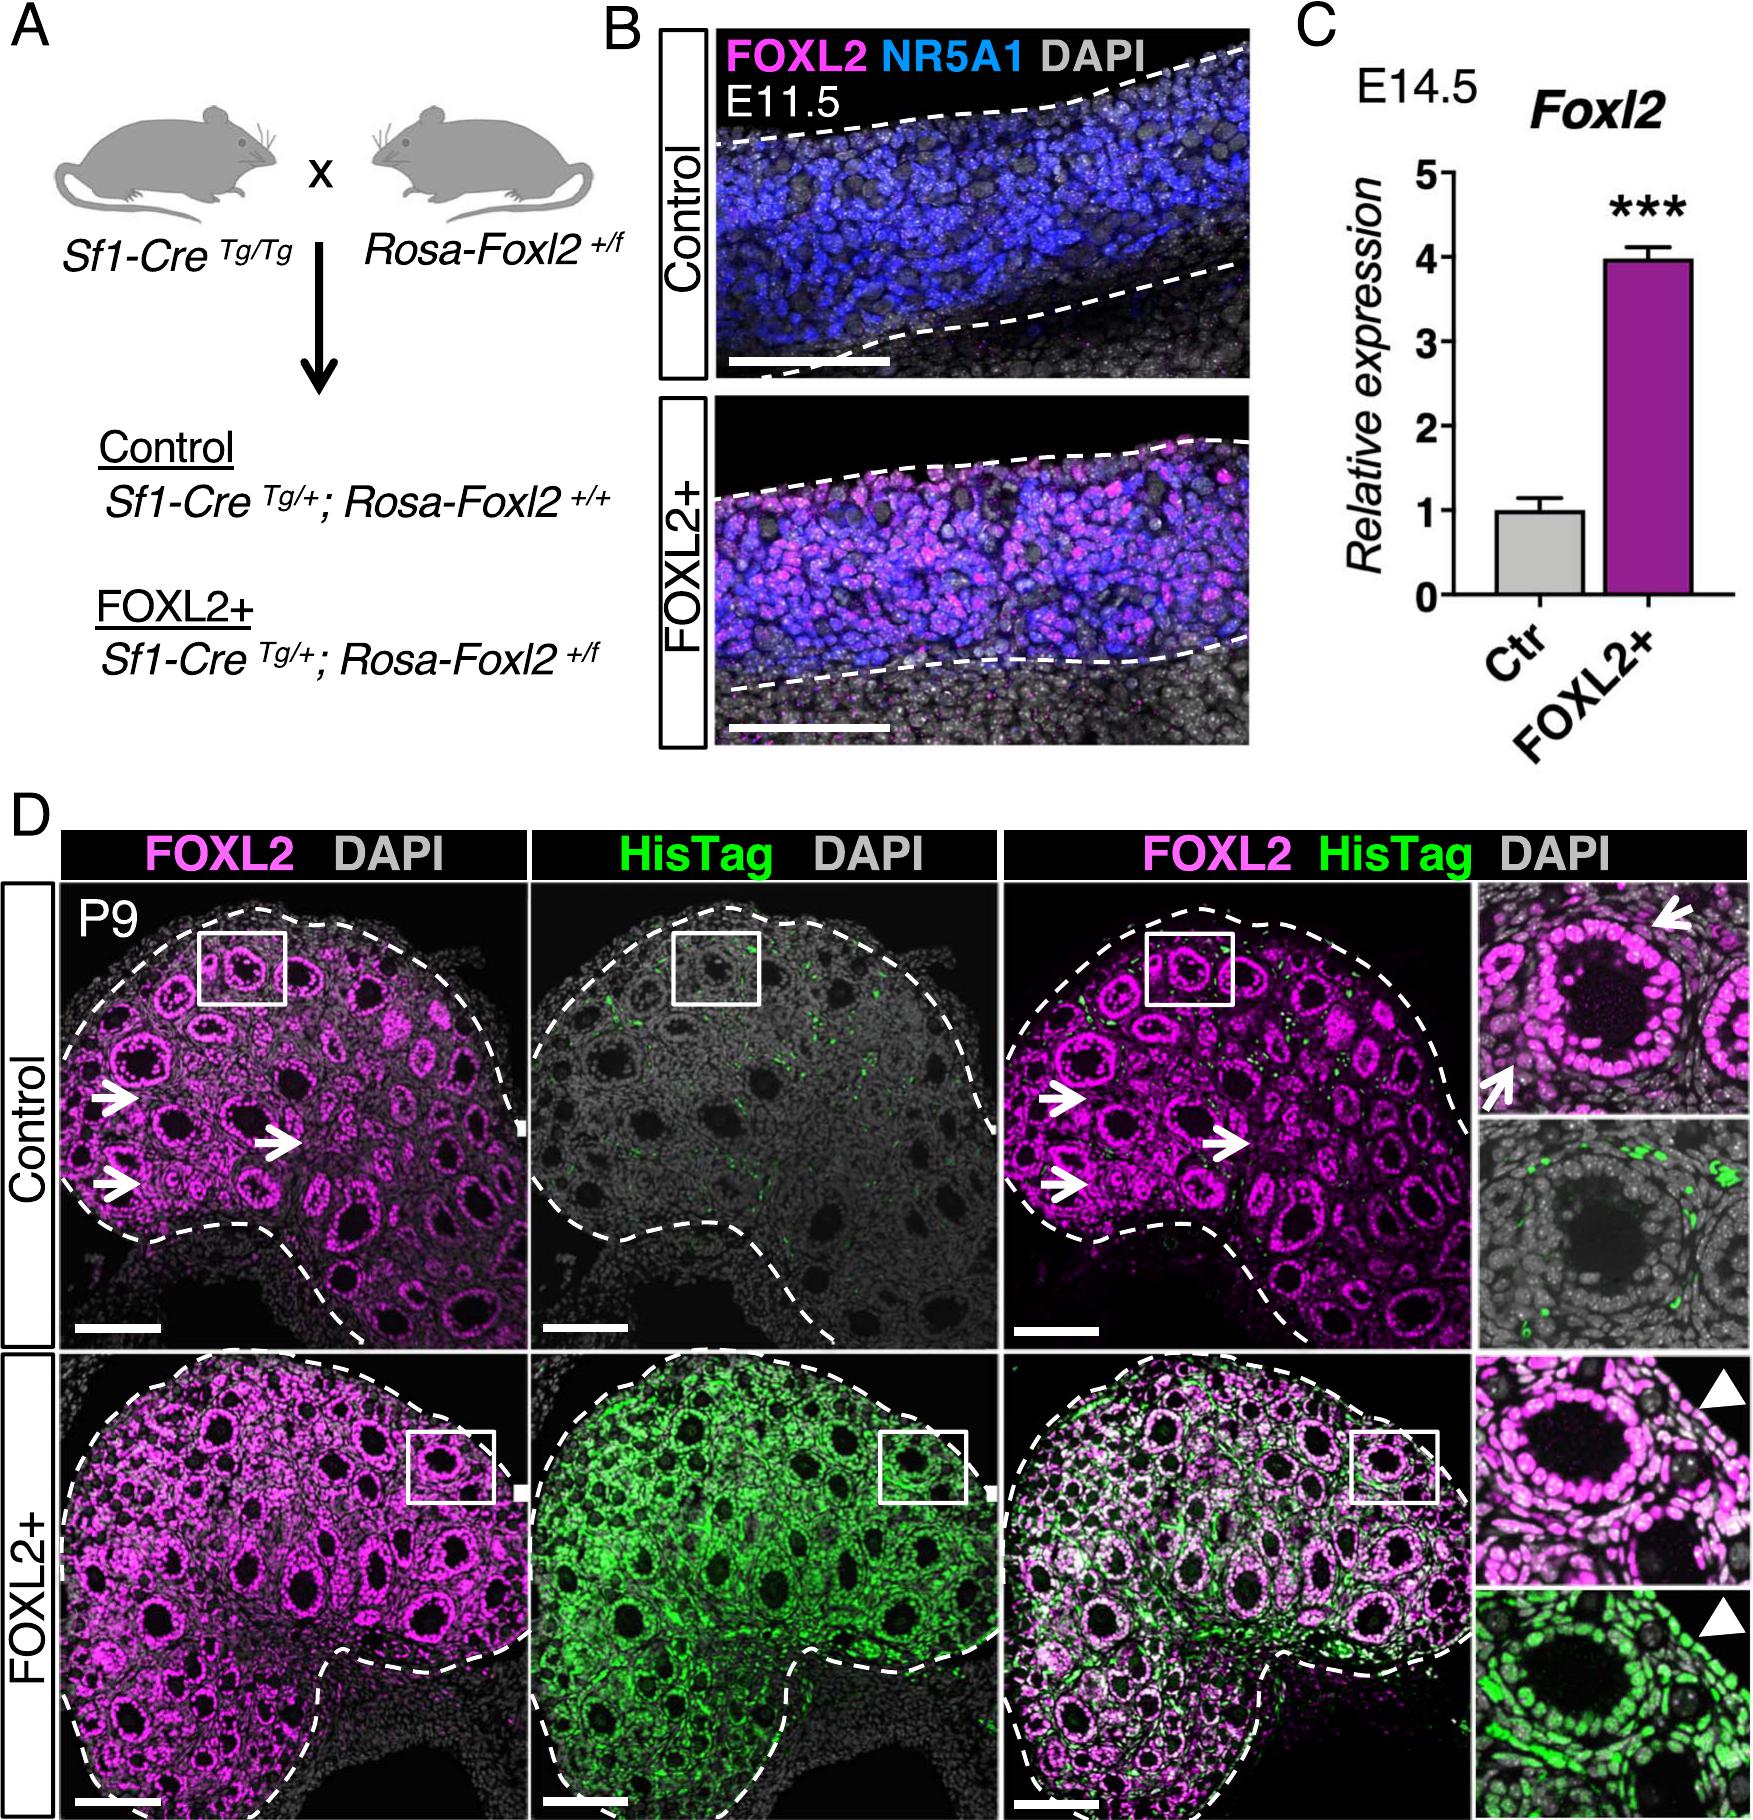 Aberrant And Constitutive Expression Of Foxl2 Impairs Ovarian Development And Functions In Mice